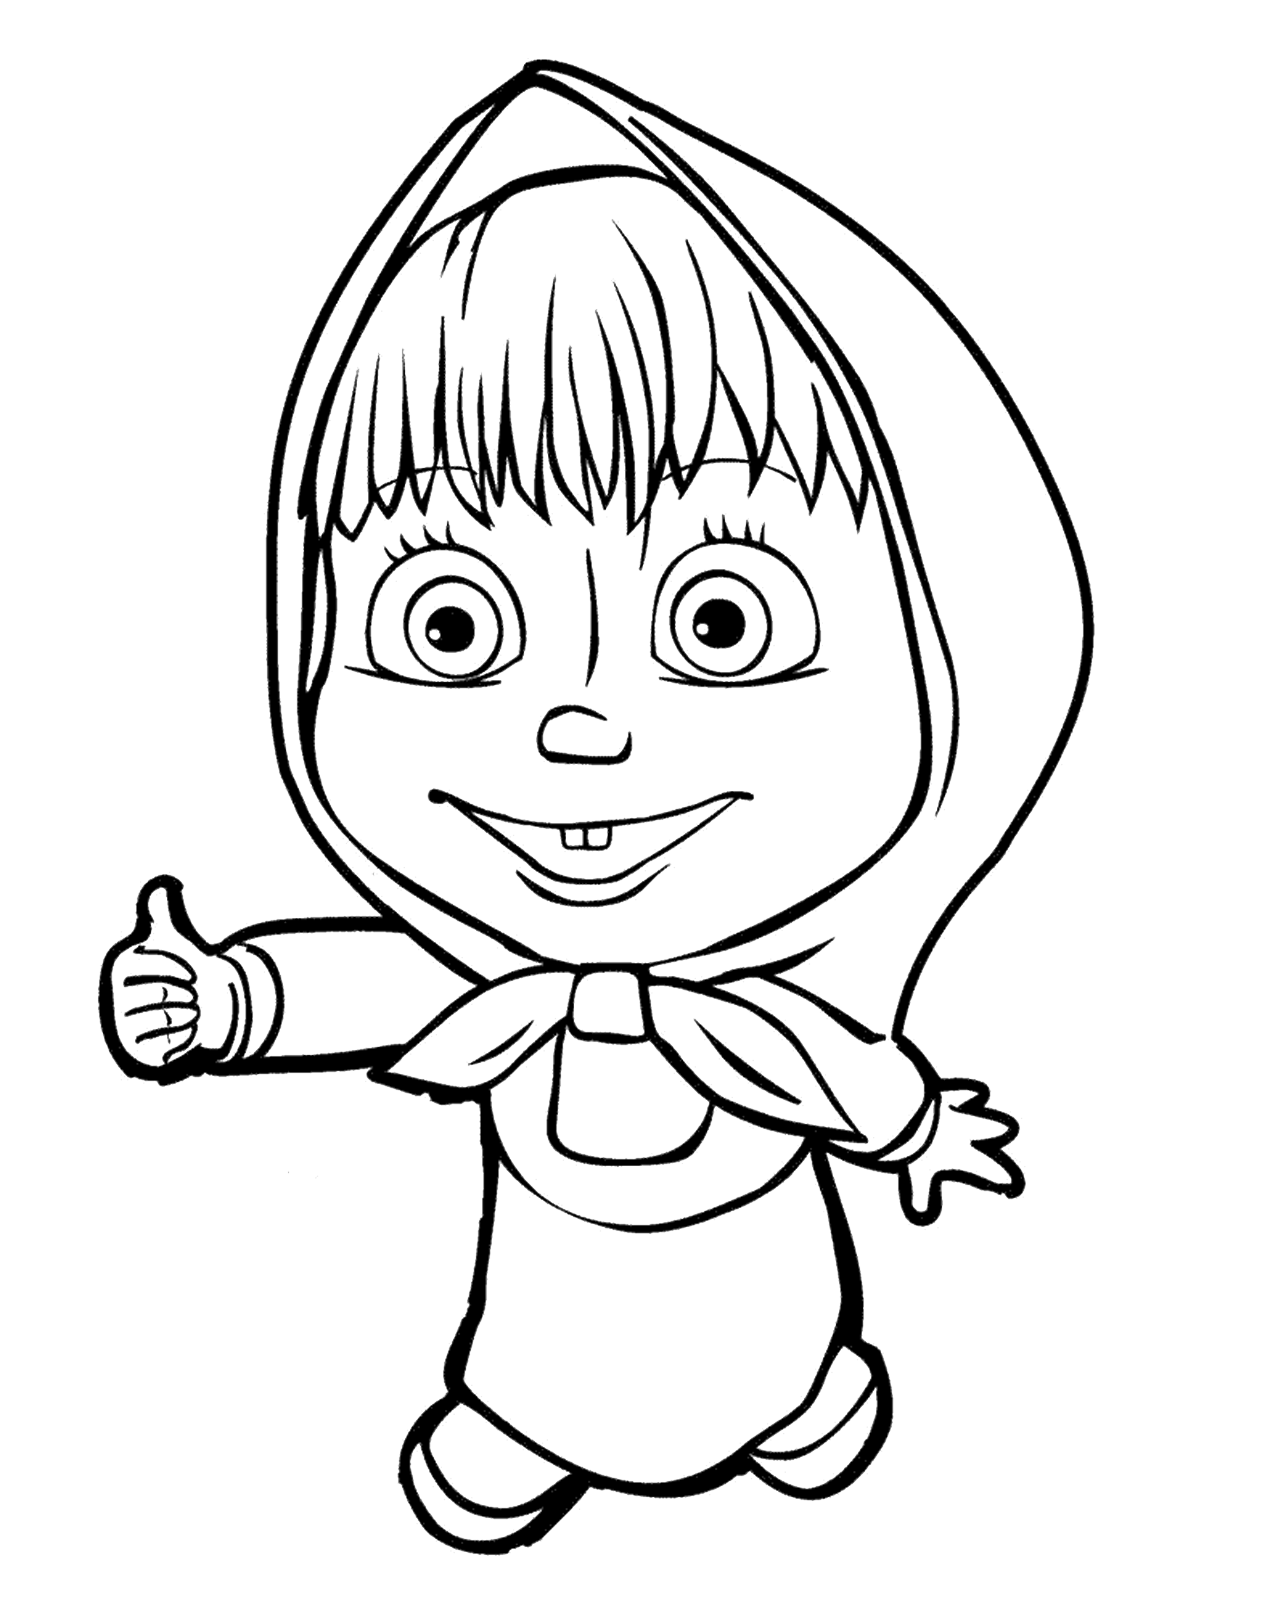 Masha Bear 4 For Kids Coloring Page